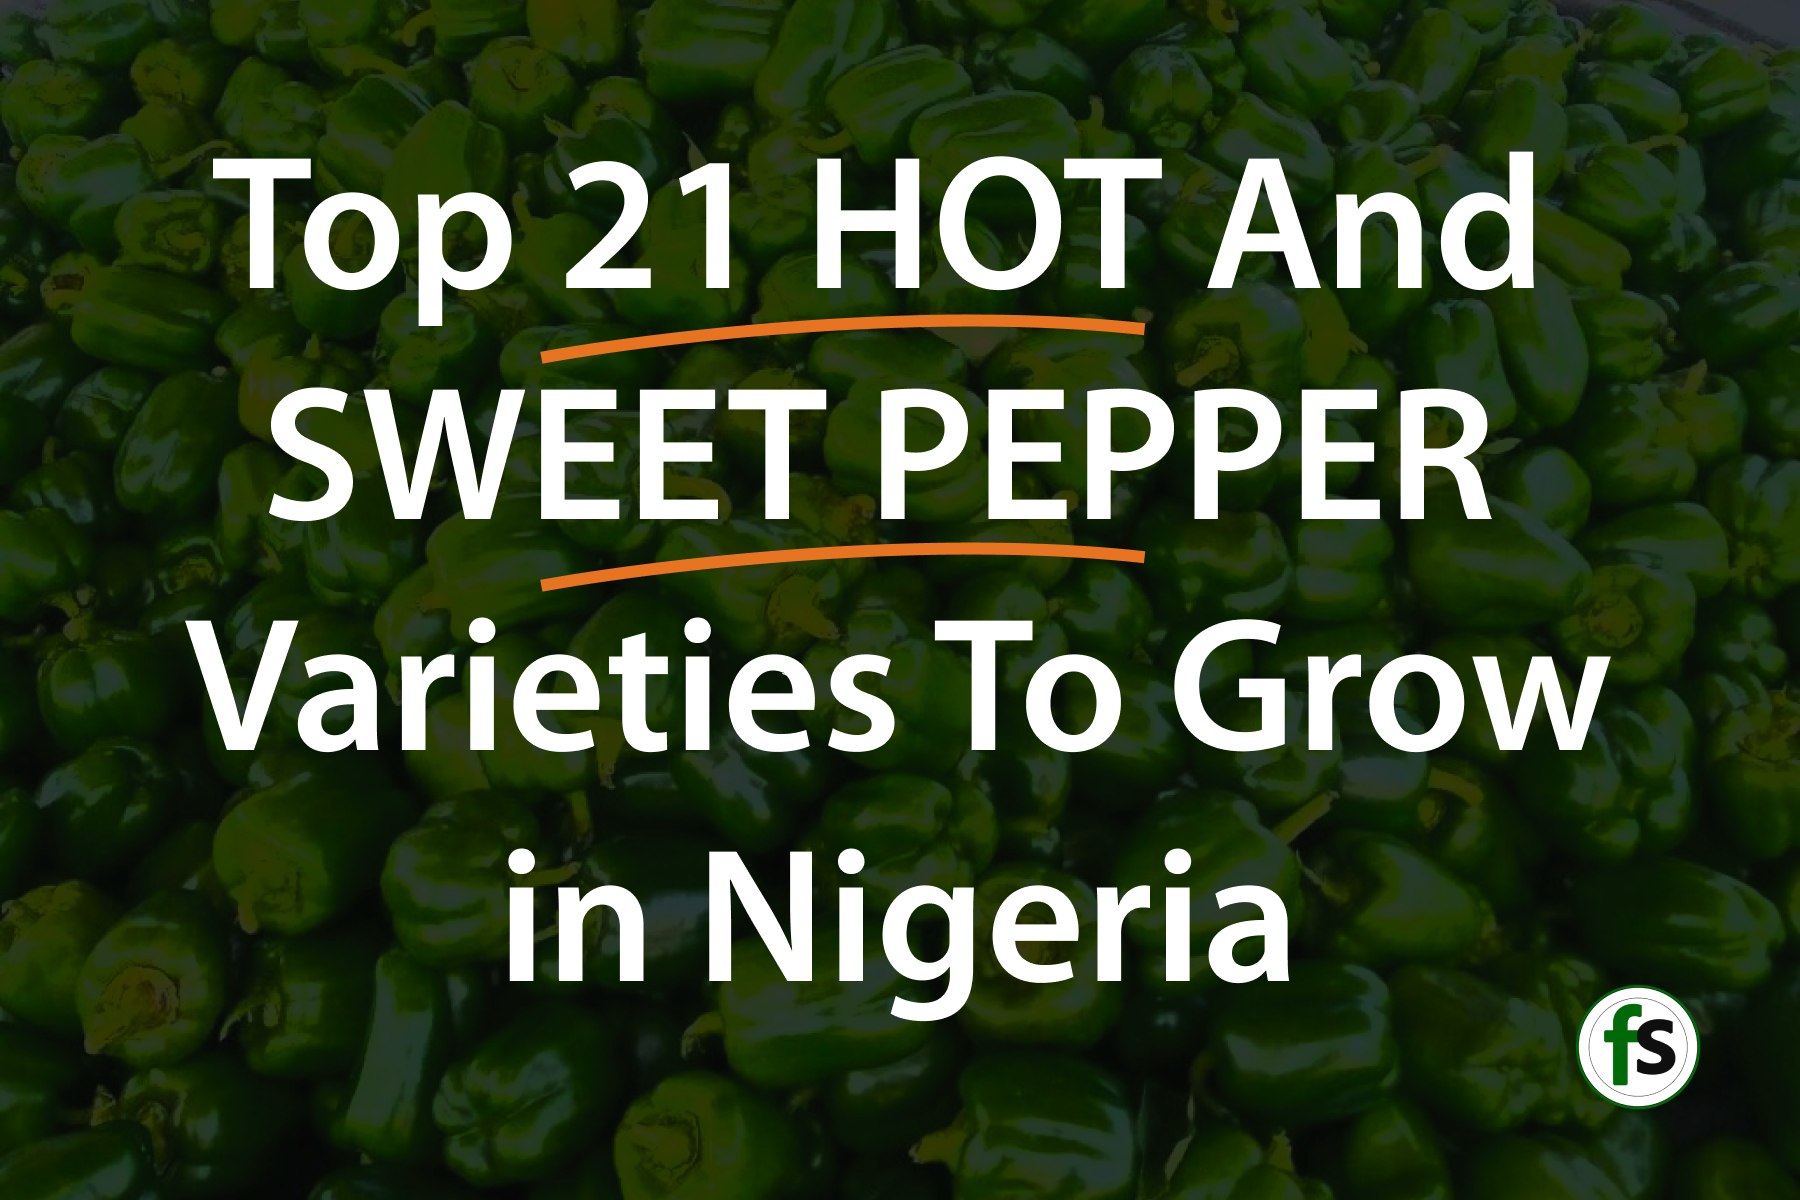 Top 21 Hot And Sweet Pepper Varieties To Grow In Nigeria Farmsquare